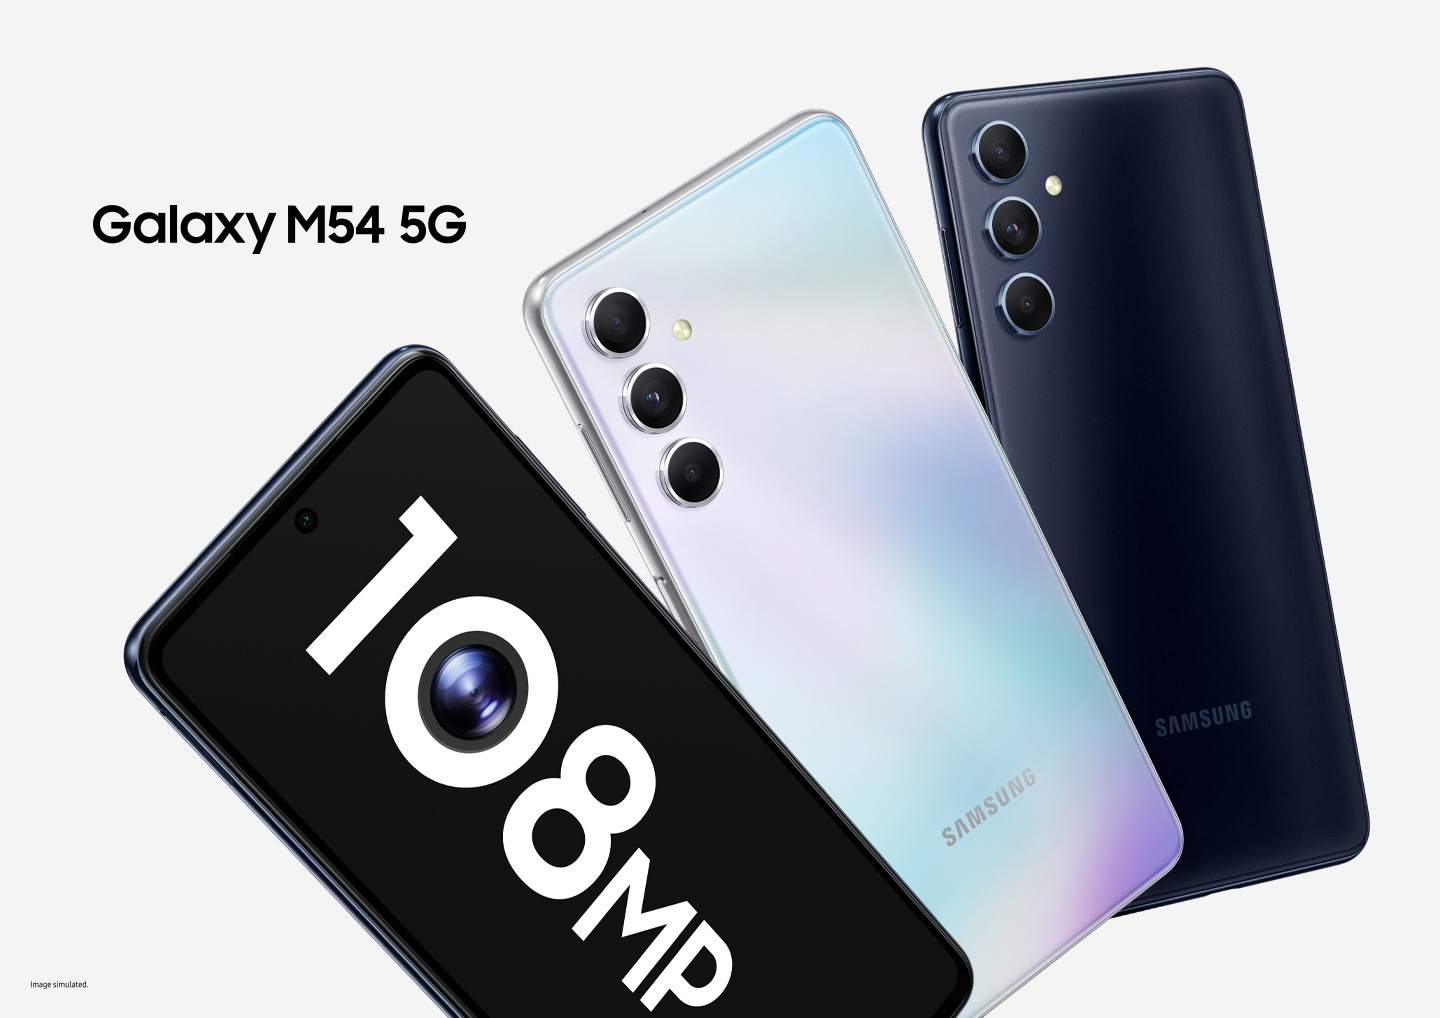 Three Galaxy M54 5G devices are spread out, device on the left showing the front screen with the typography "108MP", device on the center is showing the back angle in silver, device on the right is showing the back angle in dark navy.